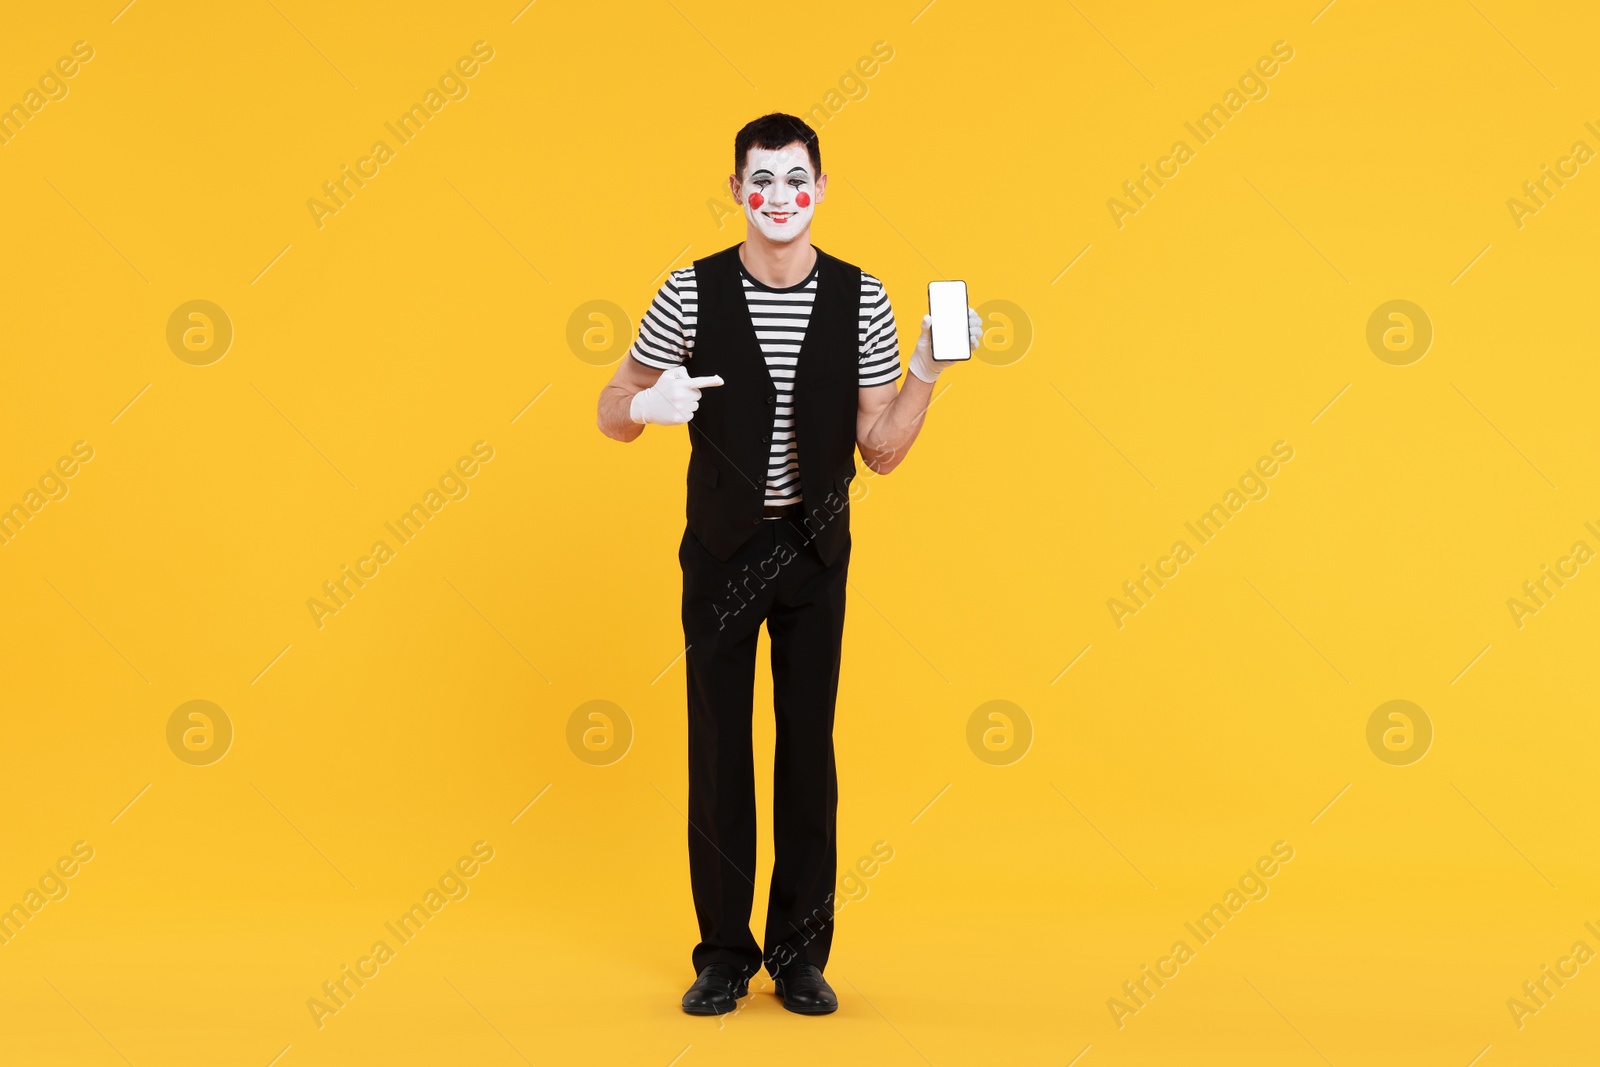 Photo of Funny mime artist pointing at smartphone on orange background